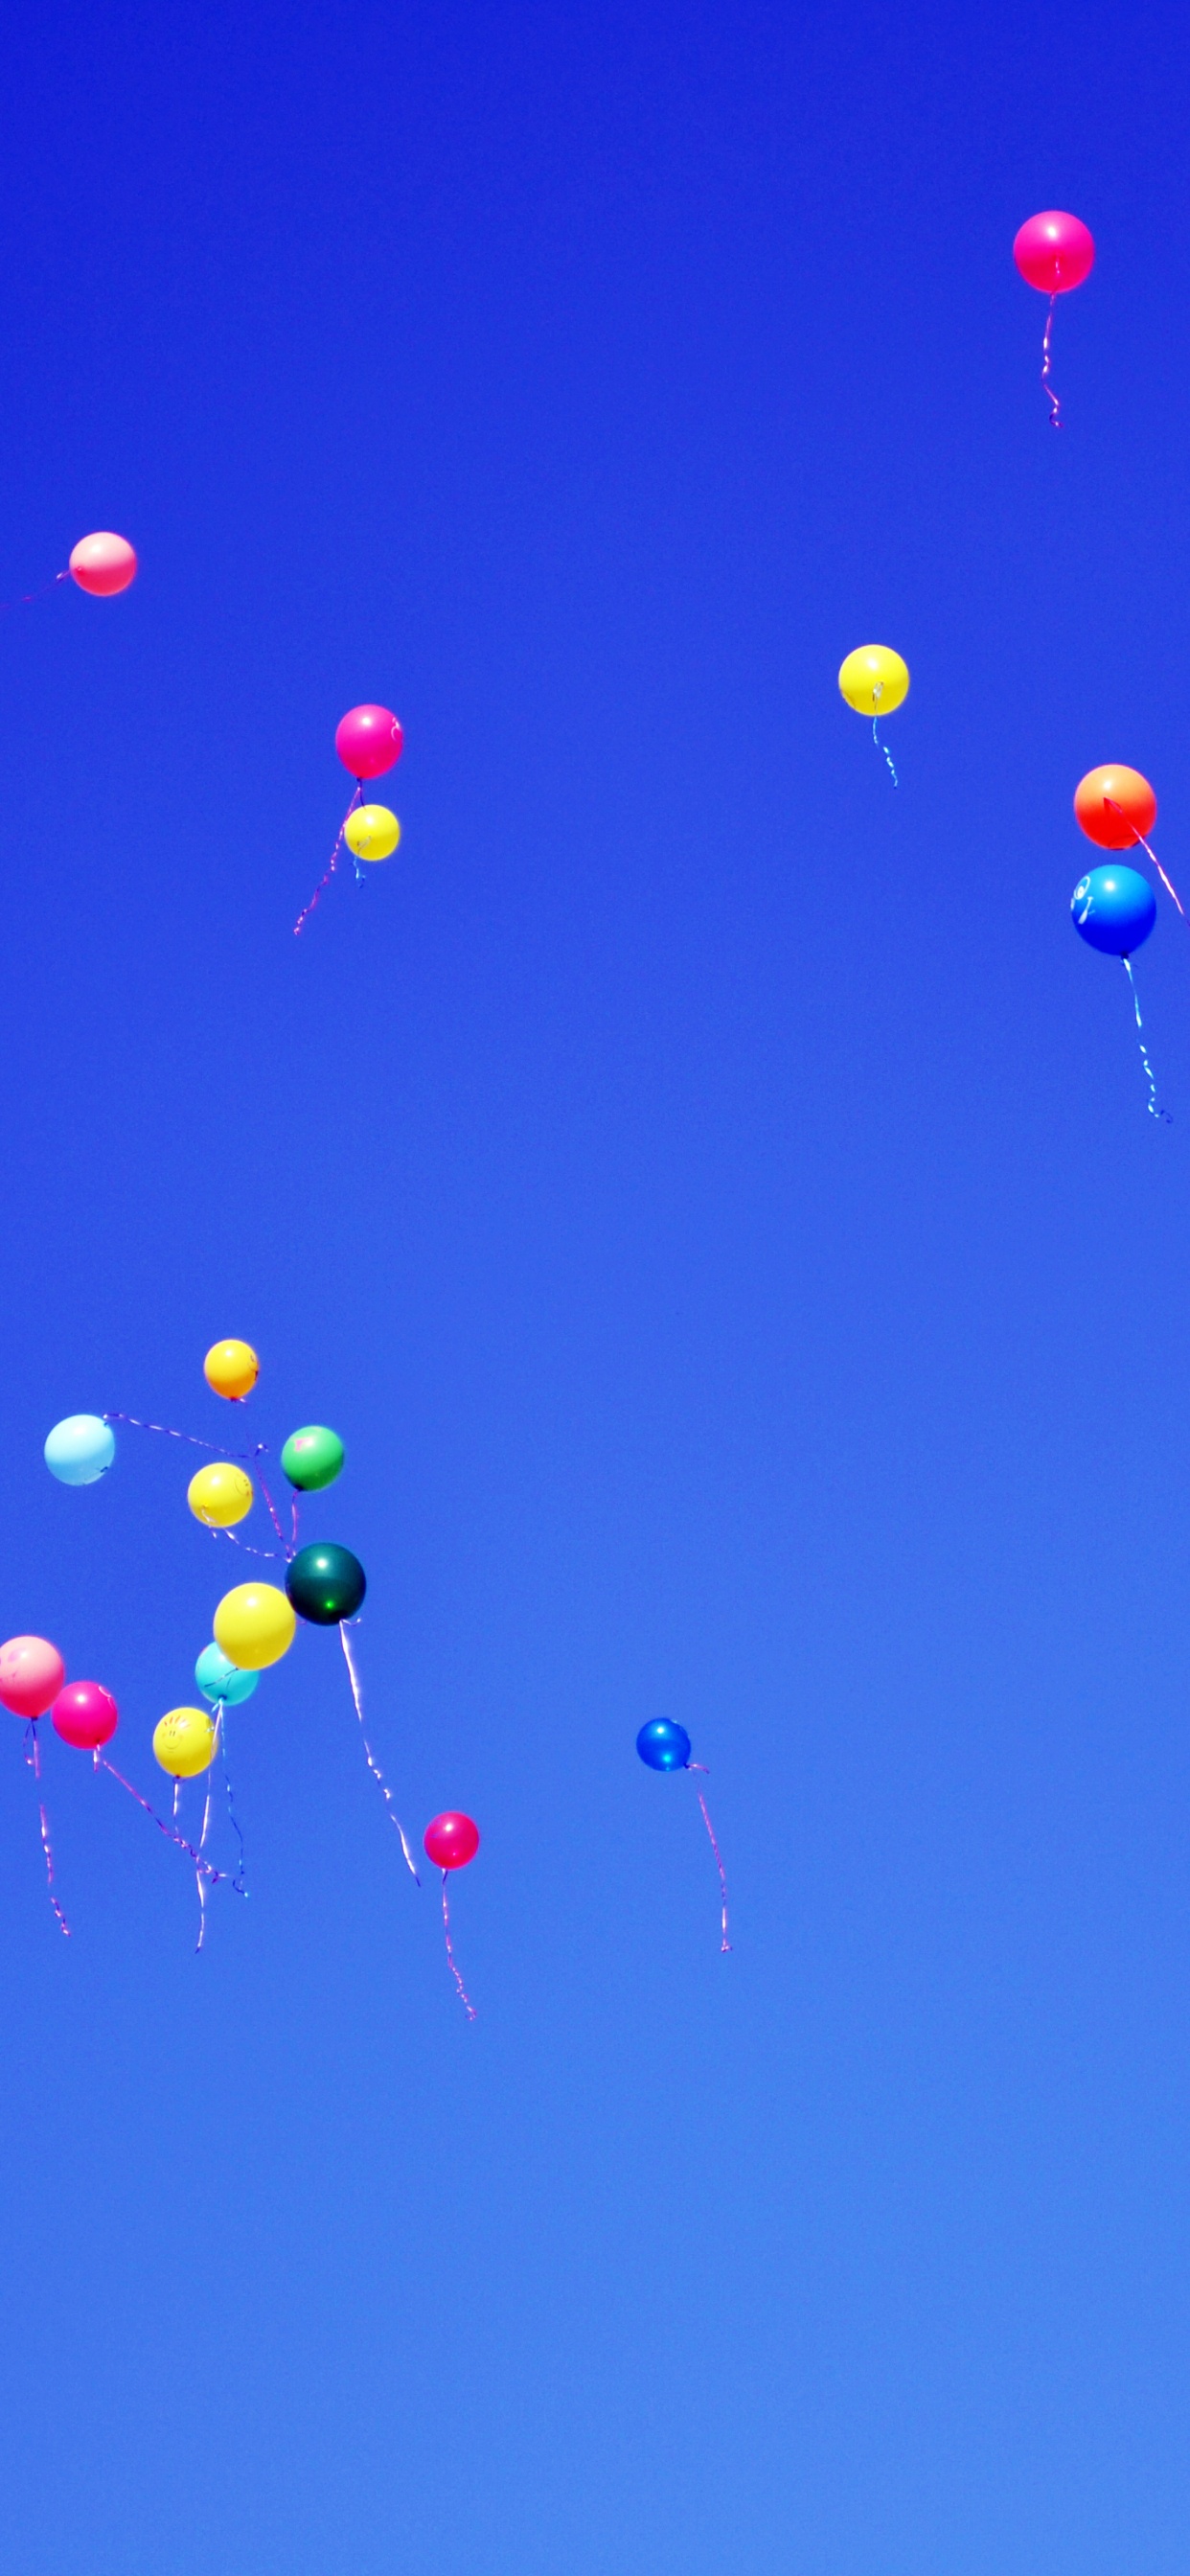 Red Blue and Yellow Balloons in The Sky. Wallpaper in 1242x2688 Resolution